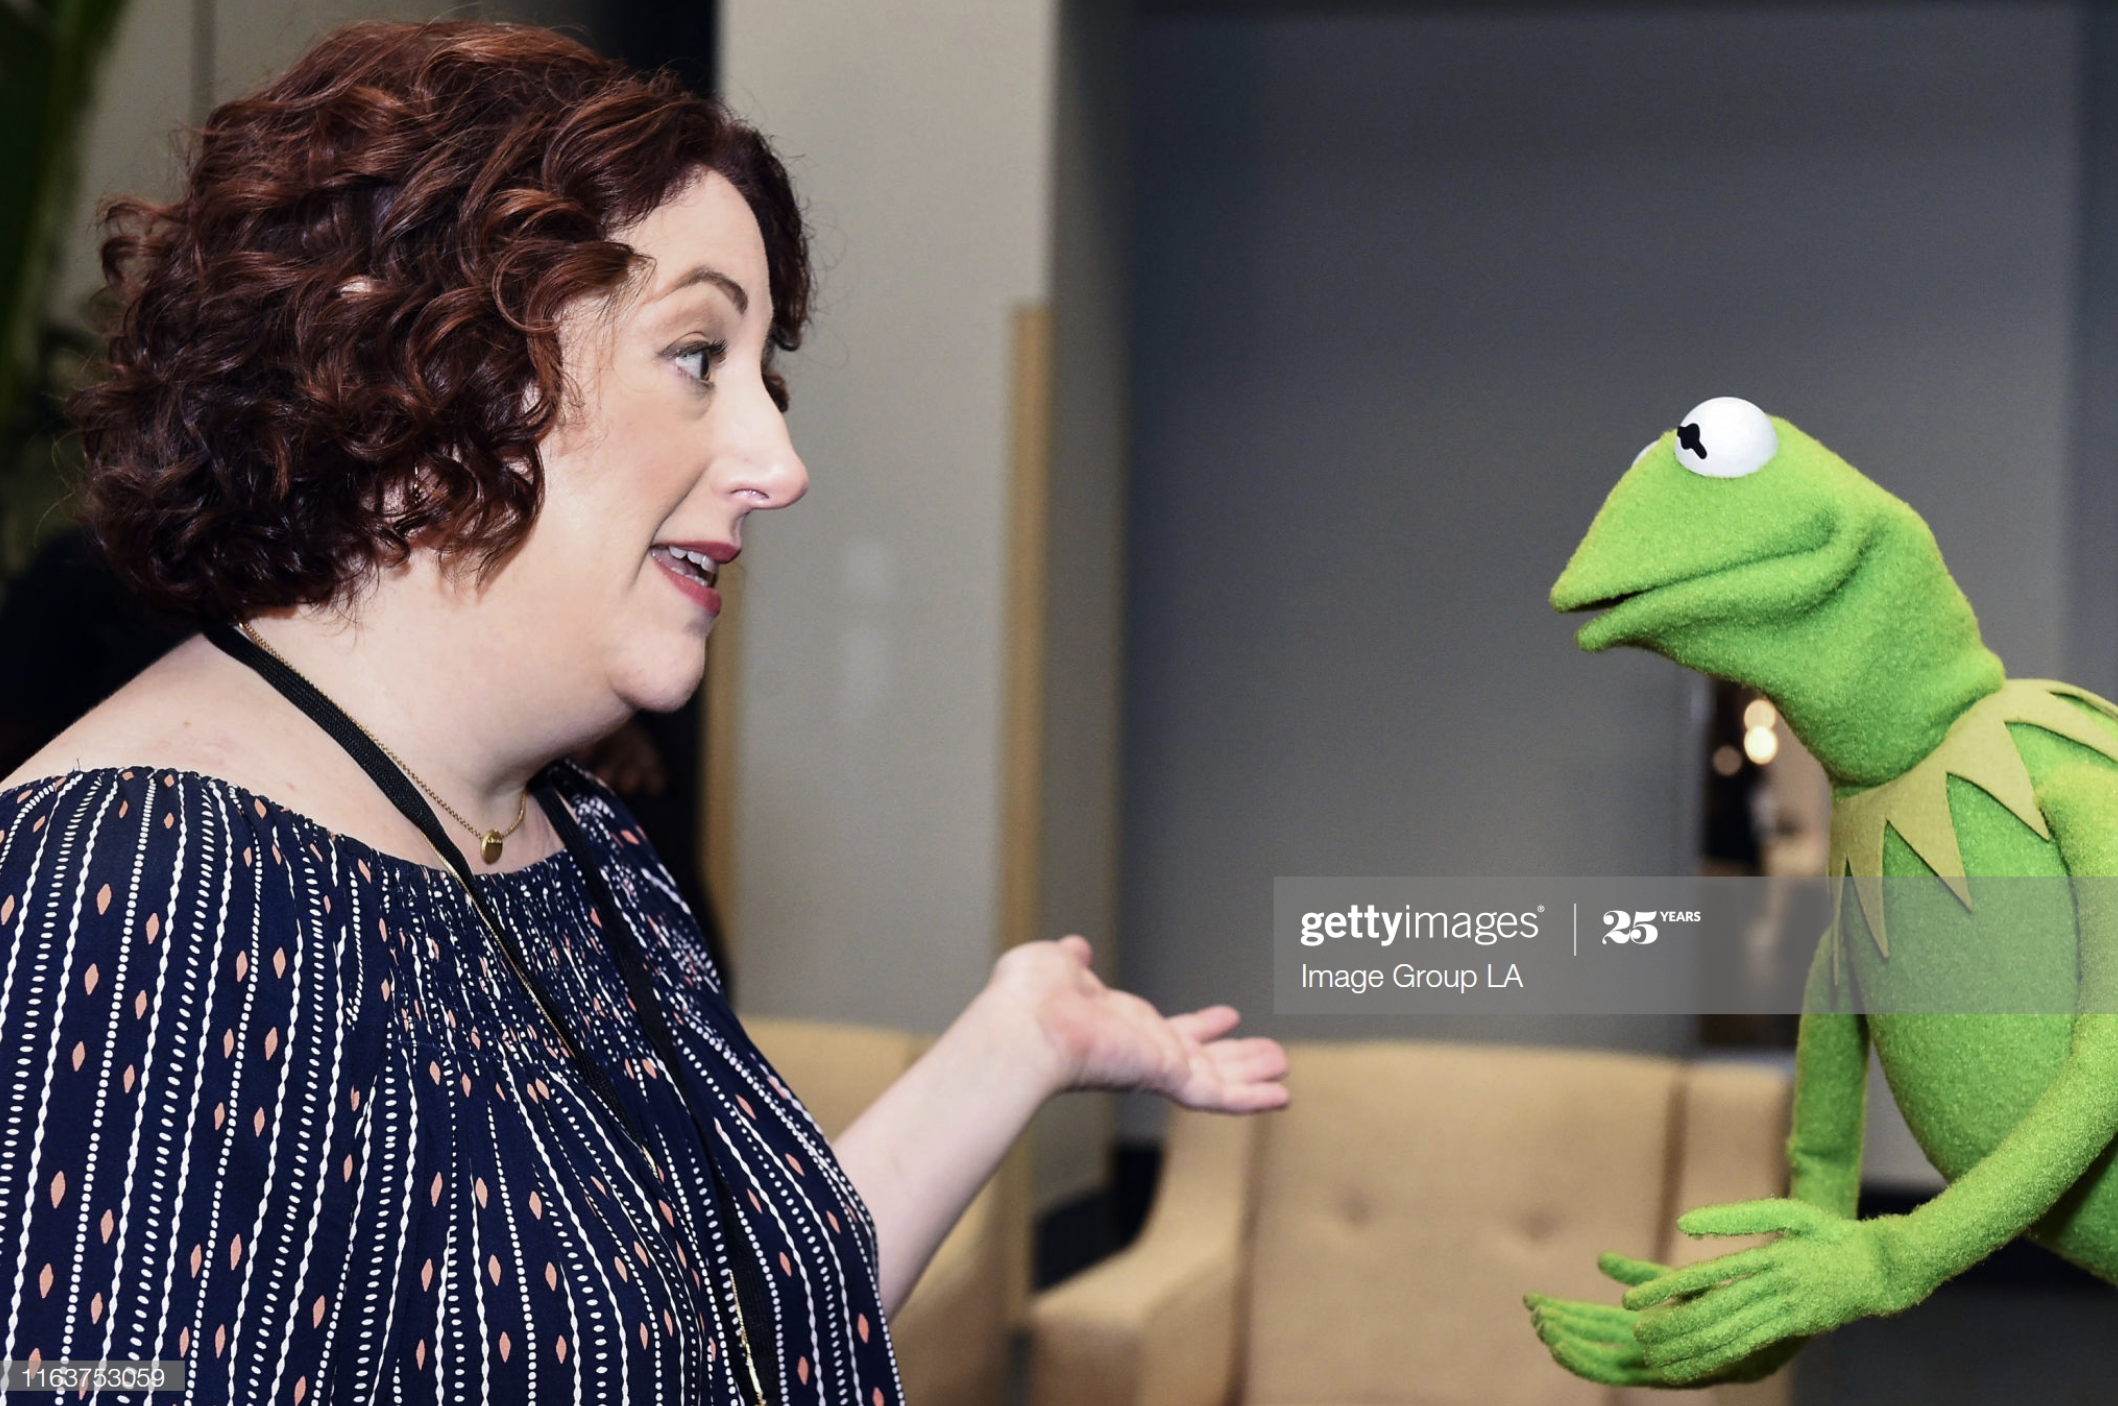 Chatting with Kermit the Frog at D23